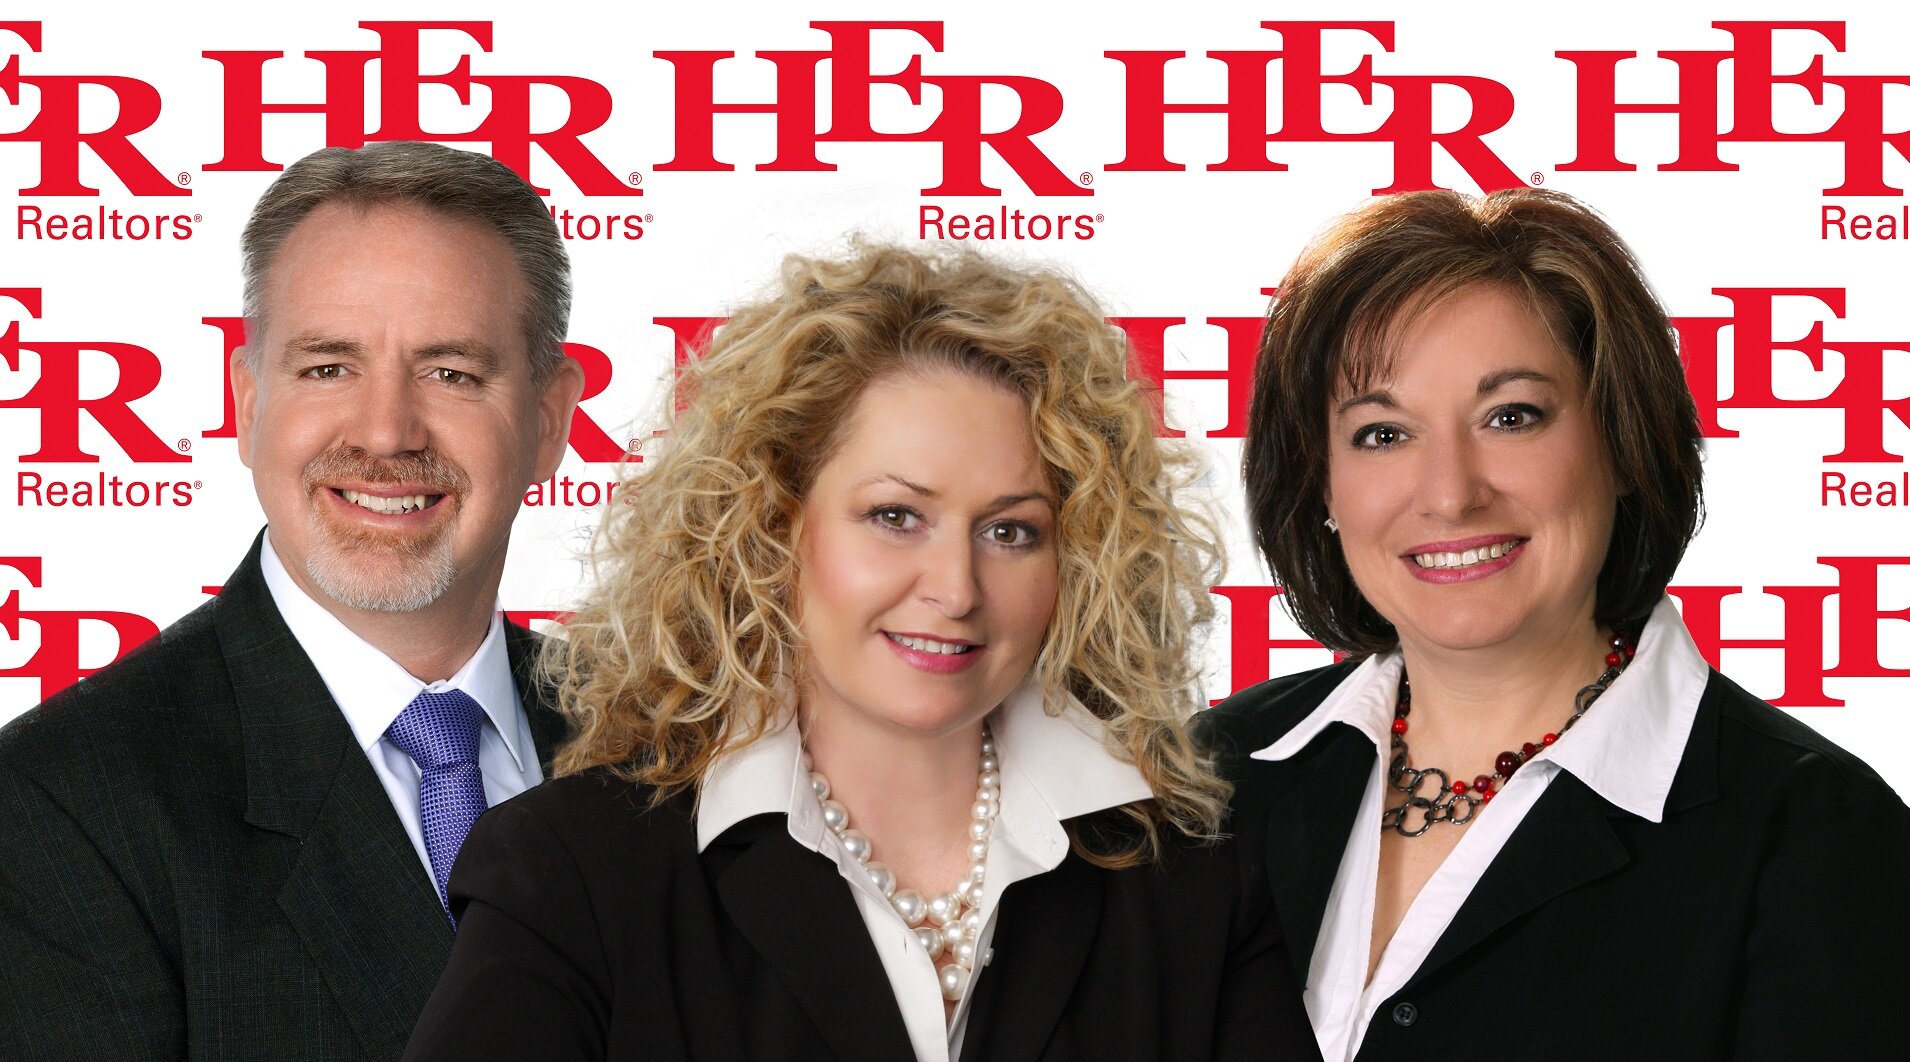 We can help you with all of your Real Estate needs! 50+ years of experience, call Jacquie, Tony or Heather today!  Dedicated to Results